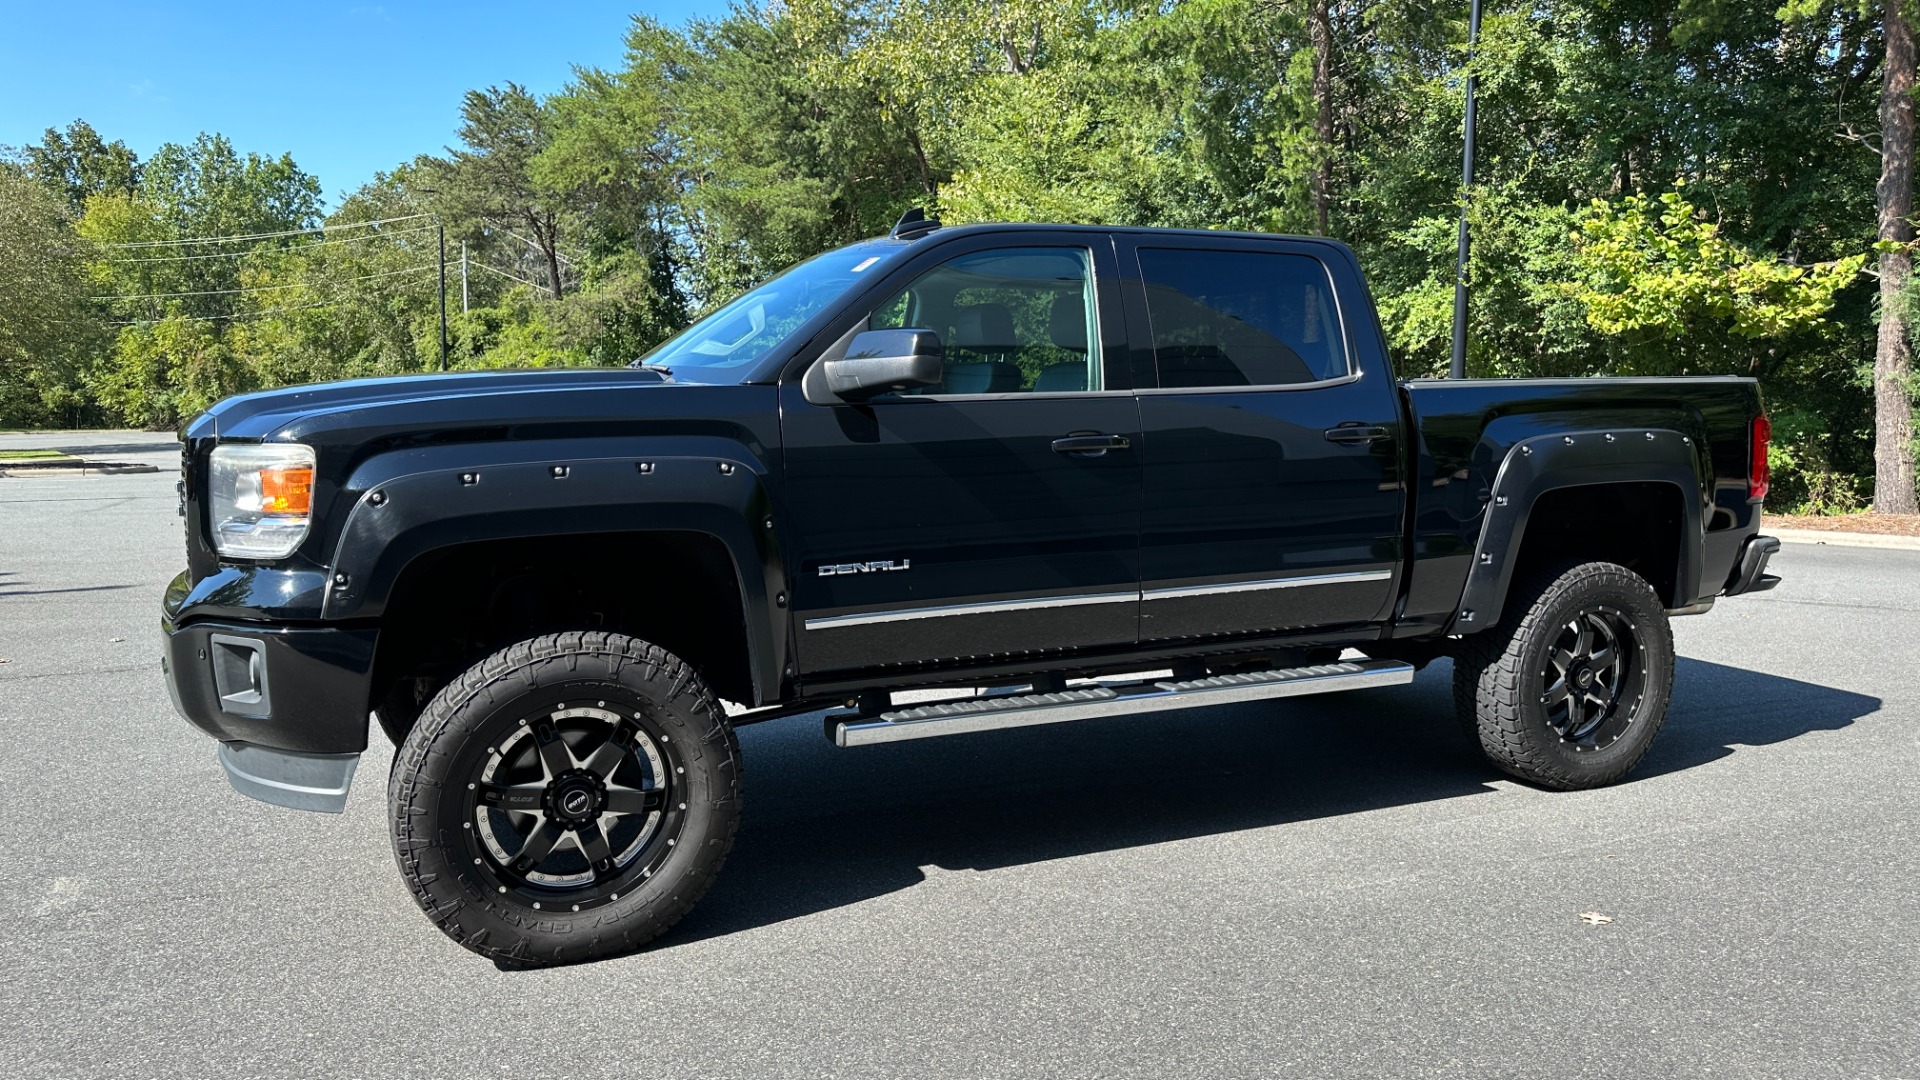 Used 2015 GMC Sierra 1500 DENALI / LIFT KIT / UPGRADED WHEELS / SUNROOF / 6.2L V8 for sale $33,995 at Formula Imports in Charlotte NC 28227 3